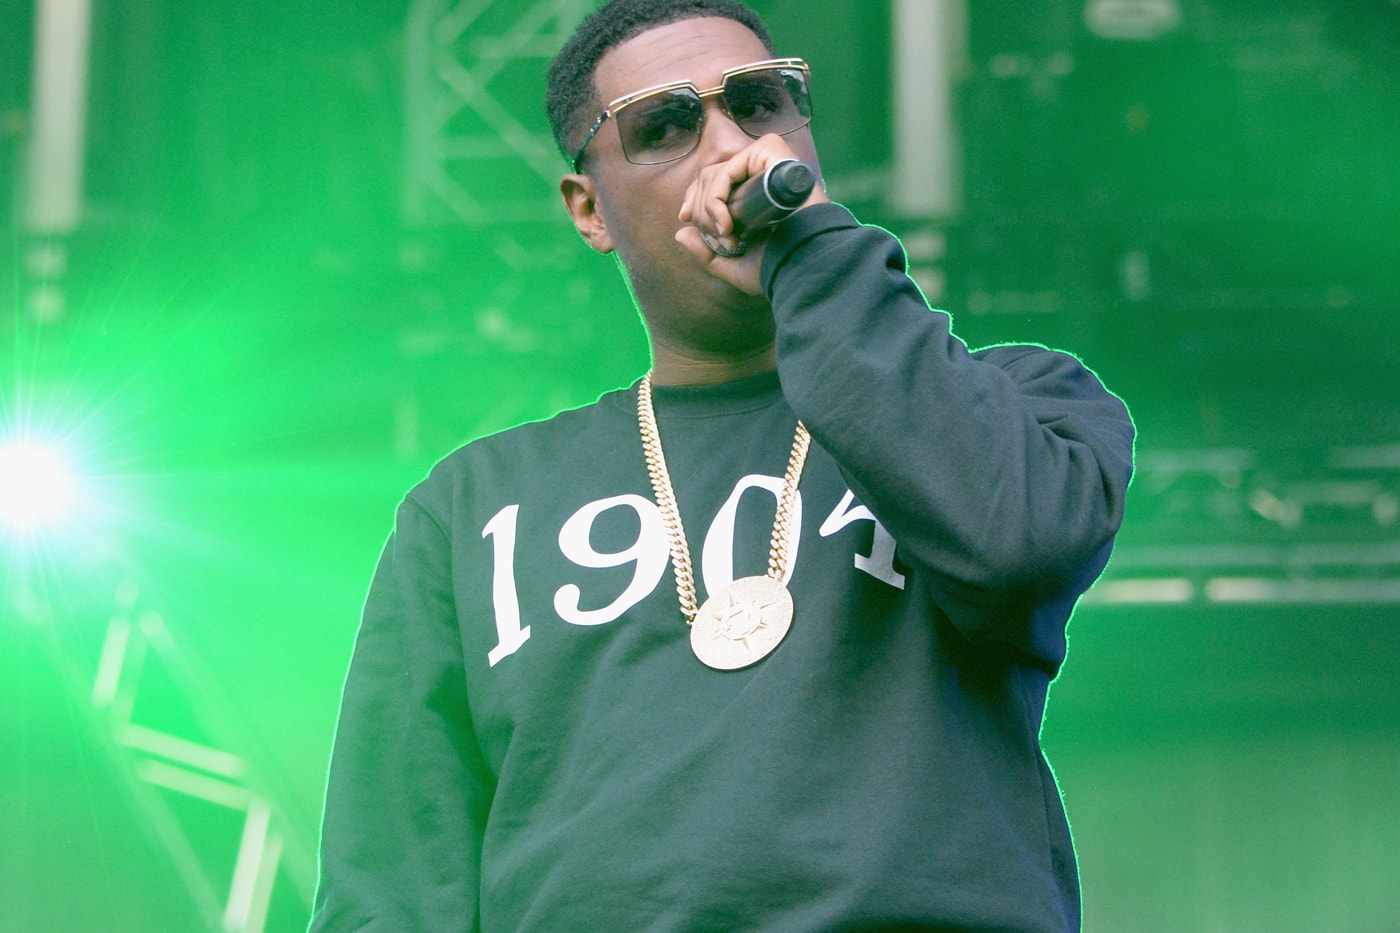 Jay Electronica Mysterious YouTube Account Remastered Tracks